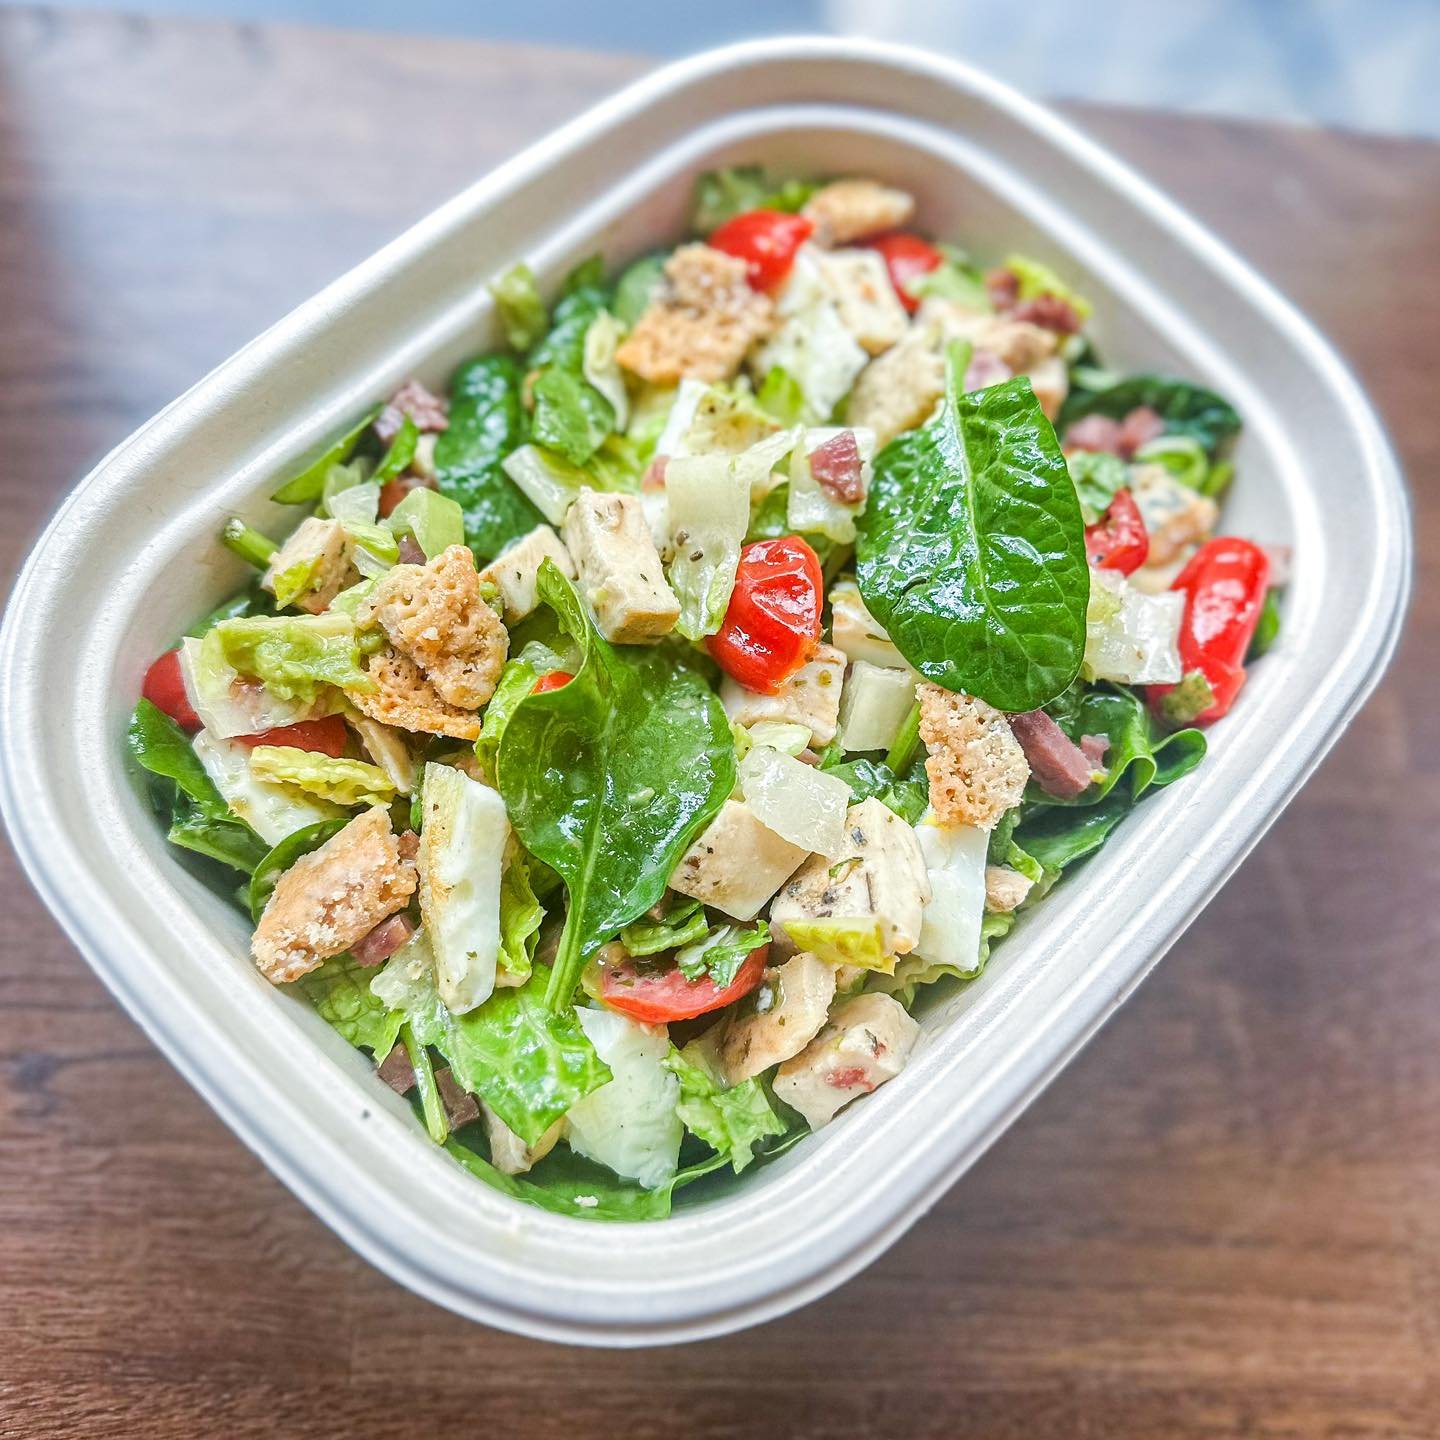 started as a special, now the maple cobb salad is here! now part of our regular menu with our irresistible maple dijon dressing tossed with 🥬 🍗 🥓 🥚 🥑 🍅 🧀 🥗 ❤️ 

this is your new go-to hearty healthyish salad that is delicious and leaves you f